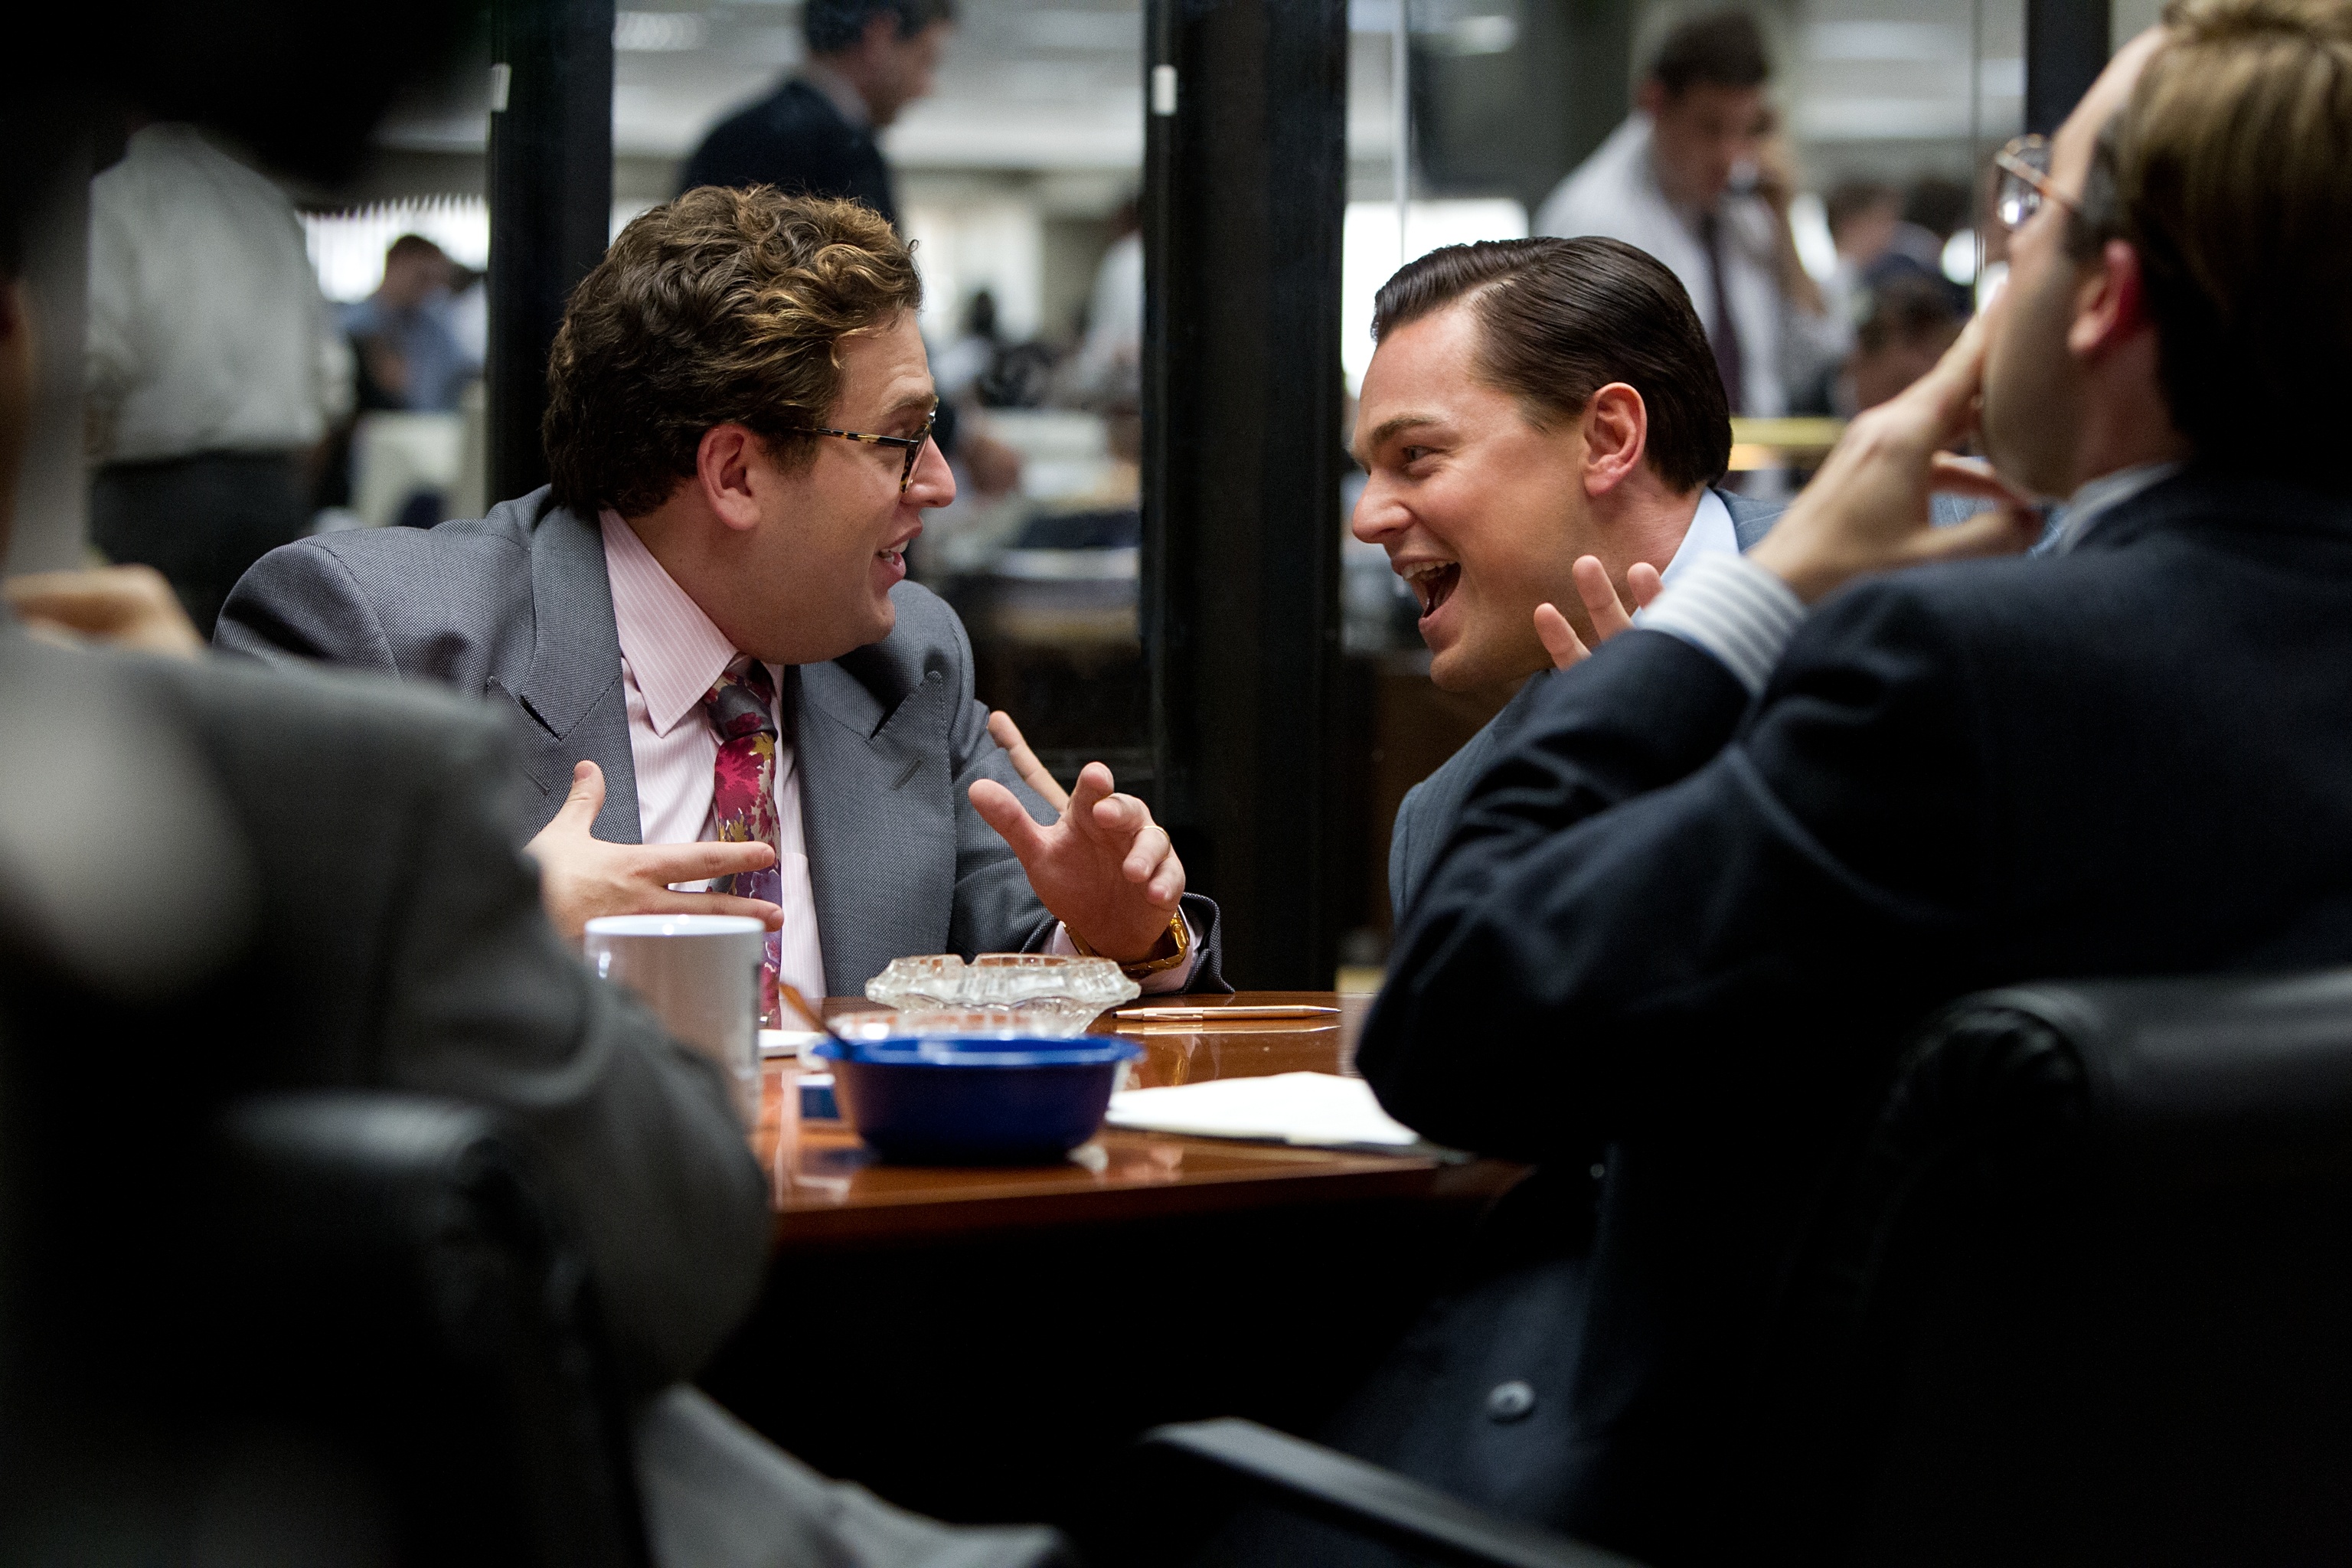 The Wolf of Wall Street: A young Jordan Belfort at a crossroads in his budding career, Donnie Azoff Jonah Hill. 3080x2050 HD Wallpaper.